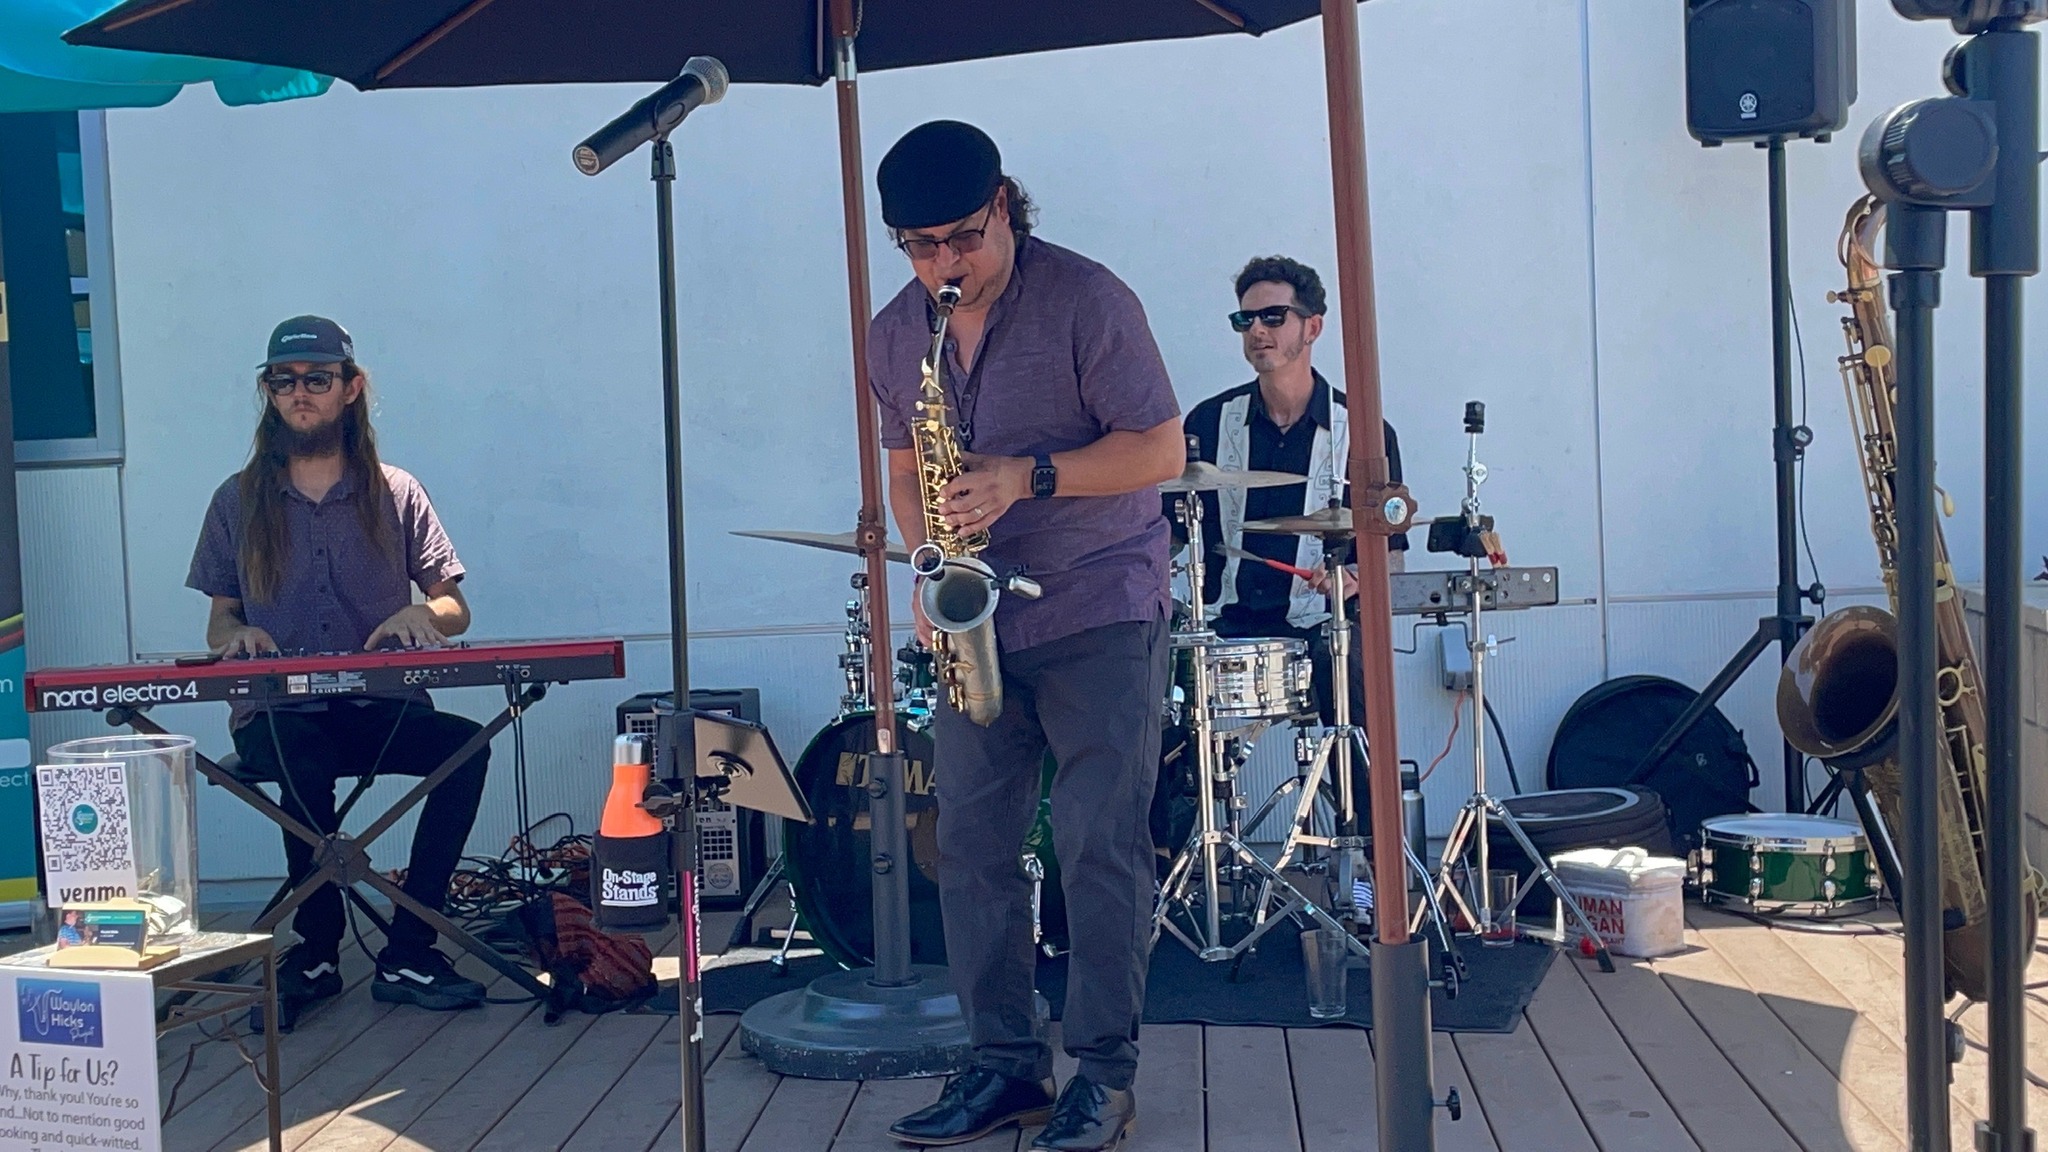 A night of jazz with The Waylon Hicks Project